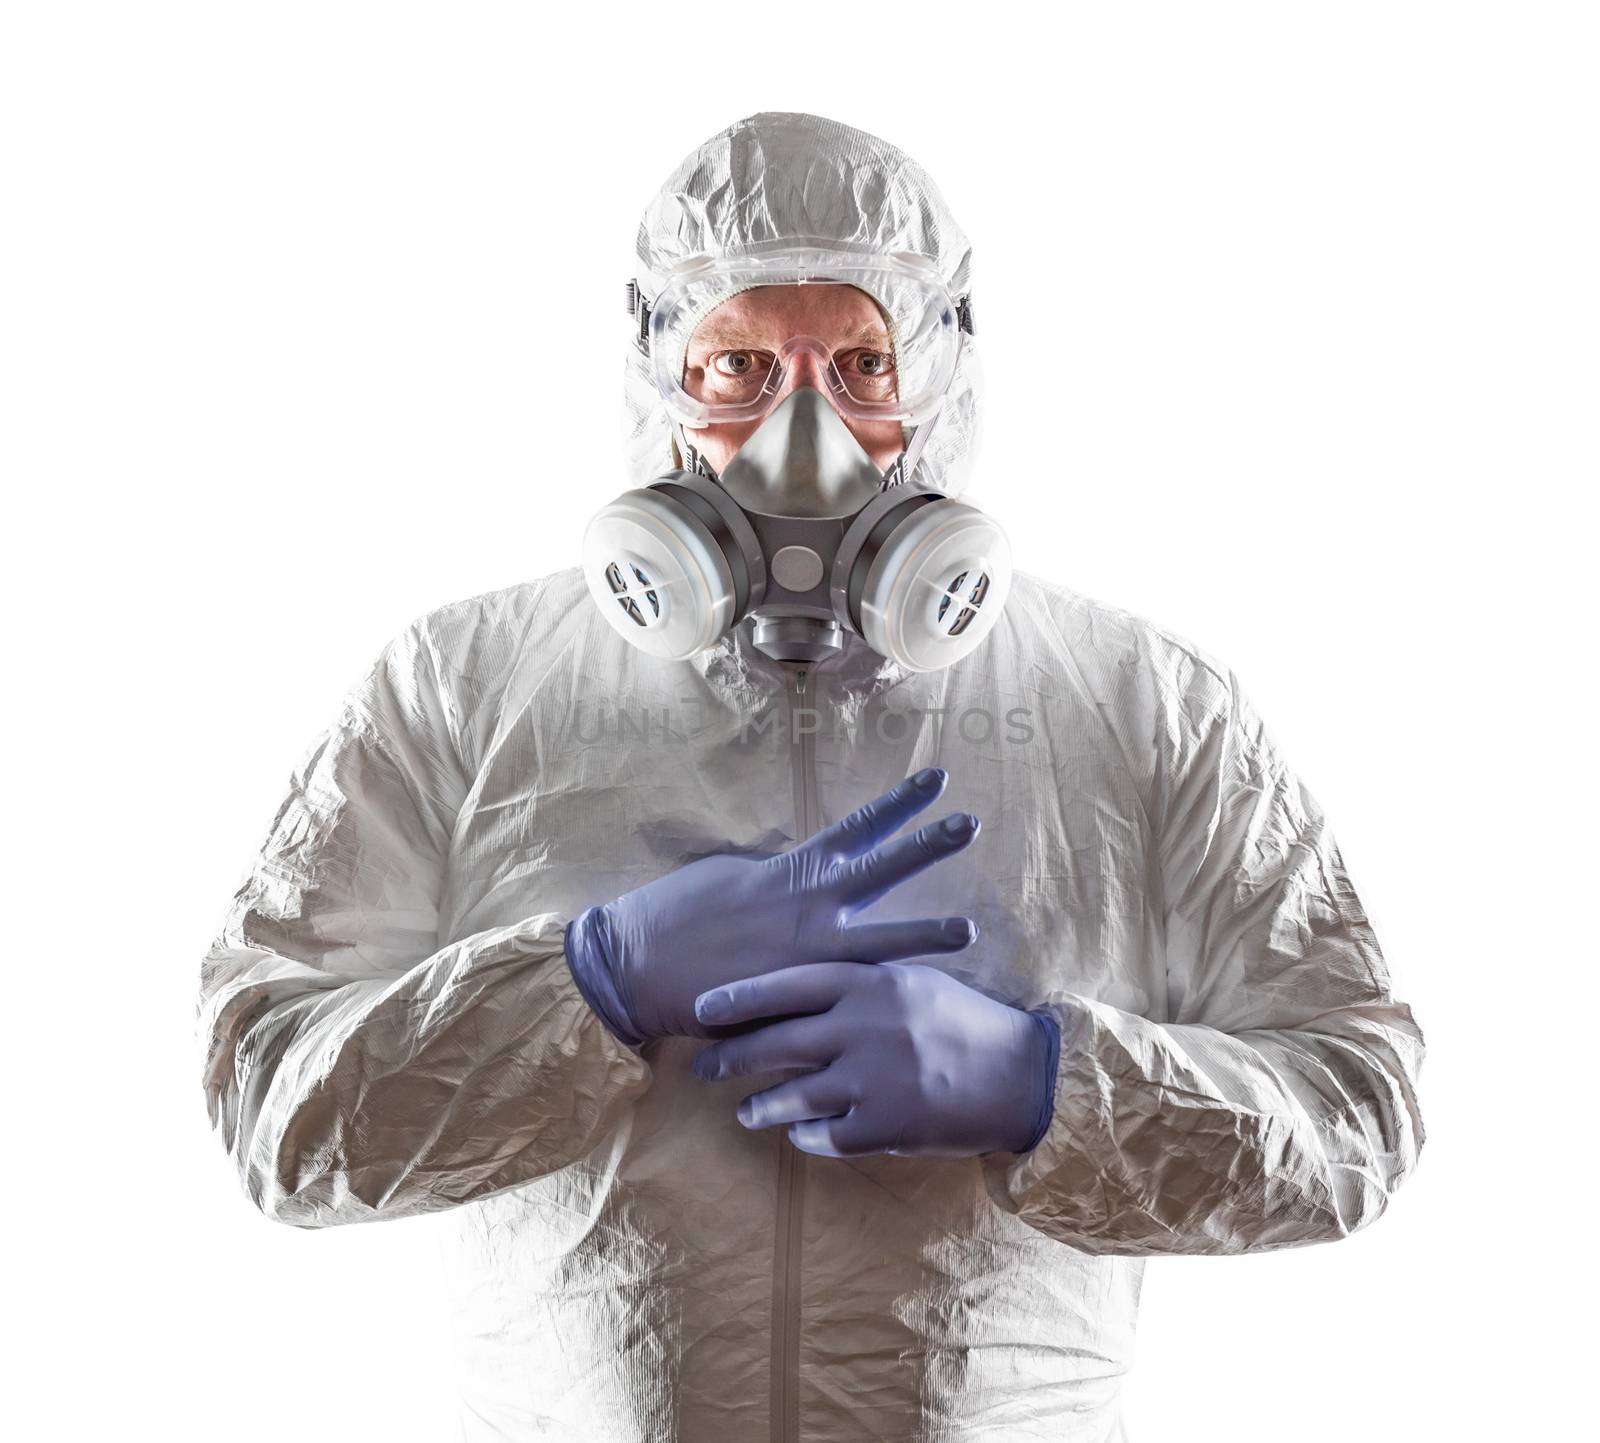 Man Wearing Hazmat Suit, Goggles and Gas Mask Isolated On White.